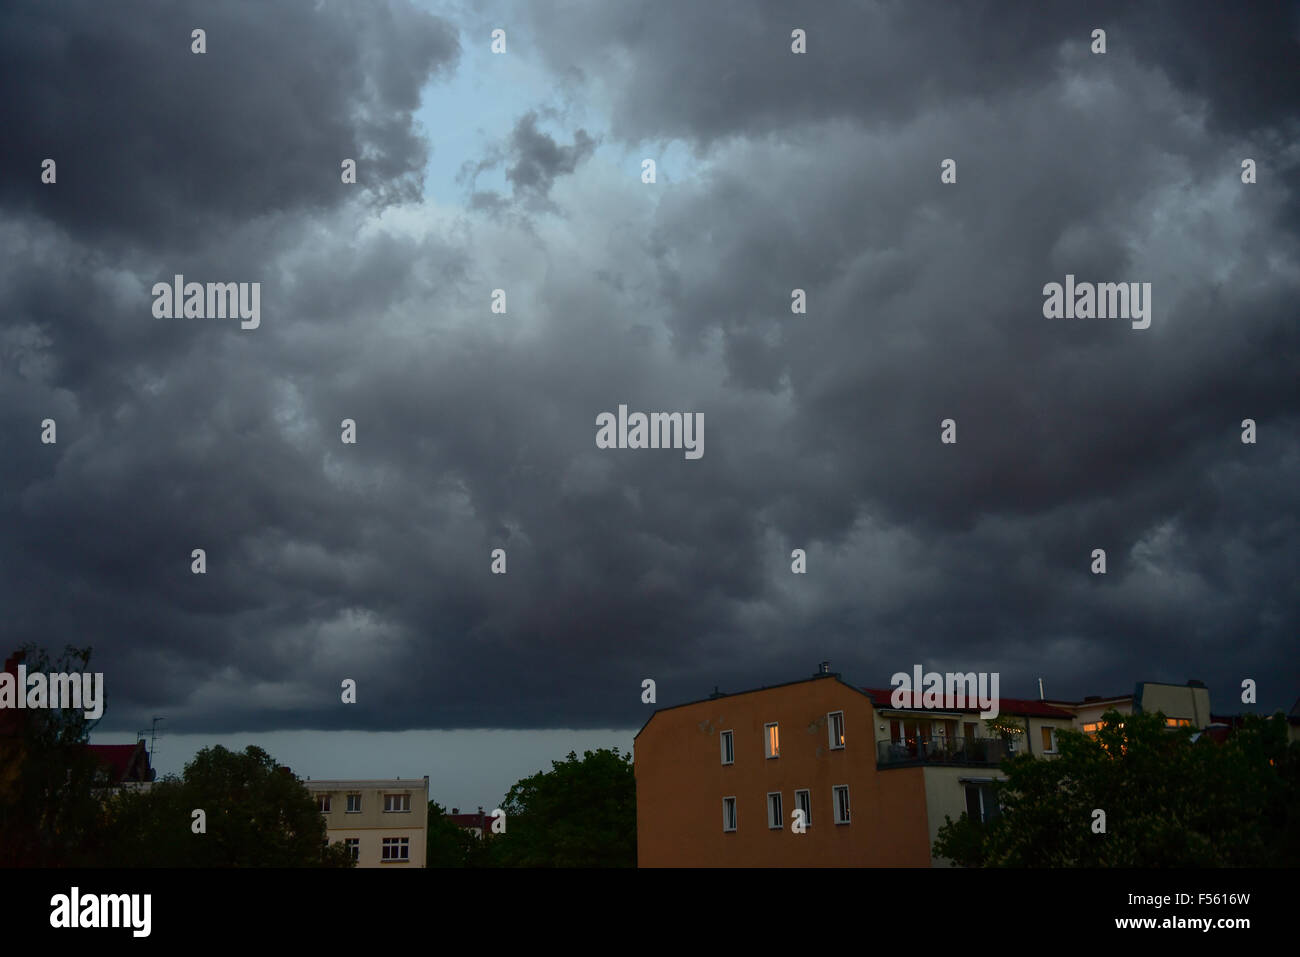 05.05.2015, Berlin, Berlin, Germany  - Storm clouds over Berlin-Prenzlauer Berg. 00Y150505D056CAROEX.JPG - NOT for SALE in G E R M A N Y, A U S T R I A, S W I T Z E R L A N D [MODEL RELEASE: NOT APPLICABLE, PROPERTY RELEASE: NO (c) caro photo agency / Teich, http://www.caro-images.pl, info@carofoto.pl - In case of using the picture for non-journalistic purposes, please contact the agency - the picture is subject to royalty!] Stock Photo